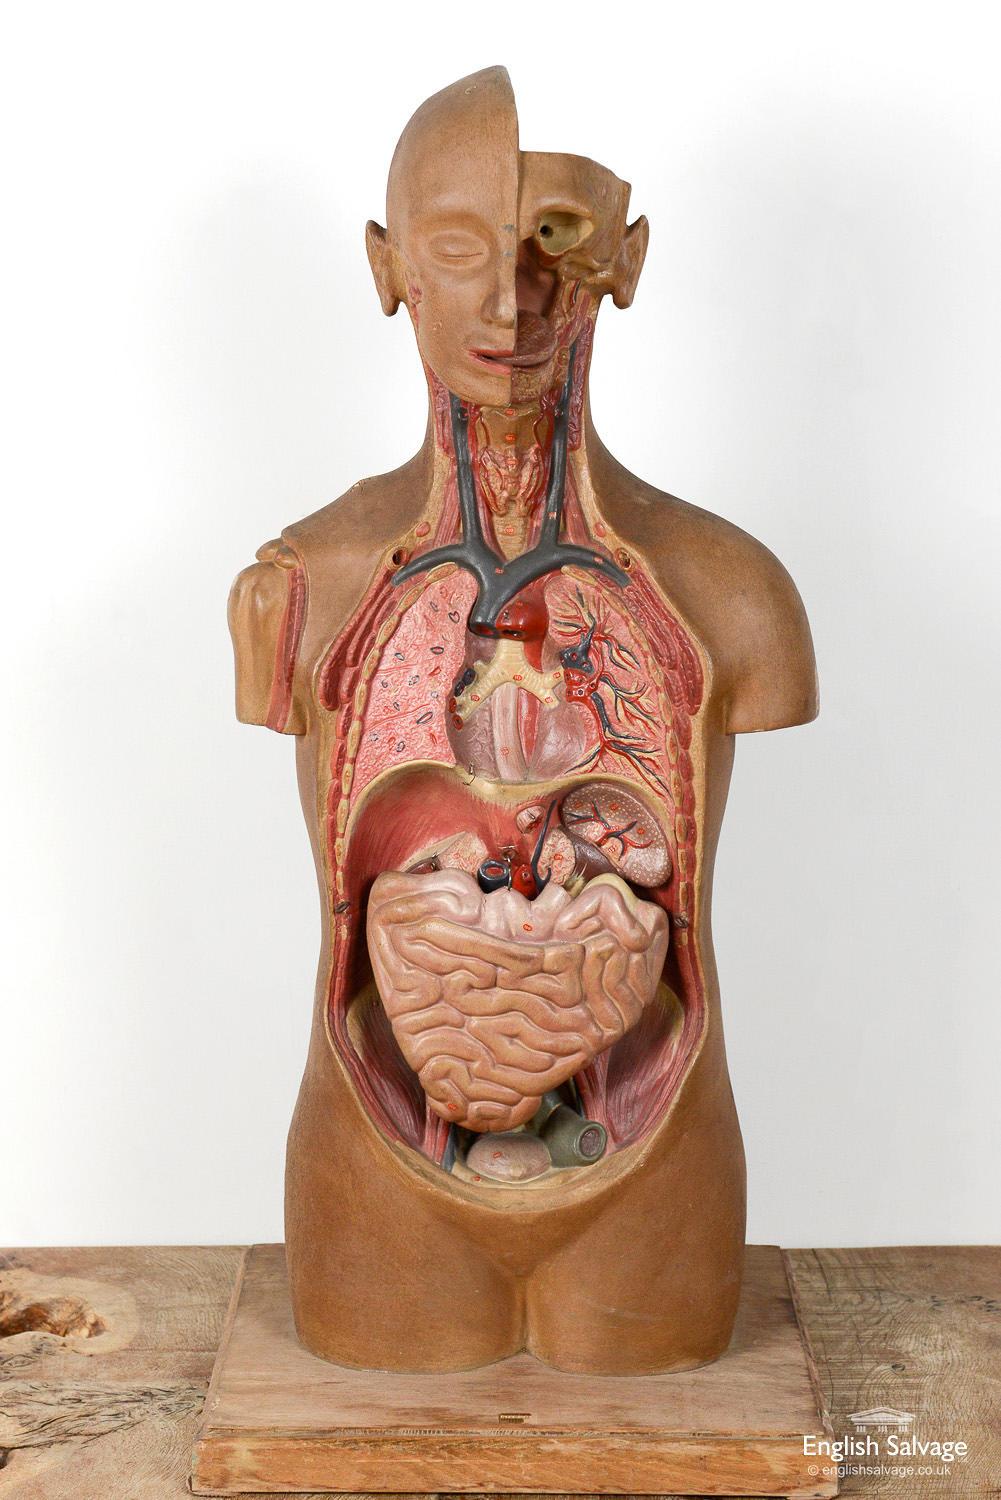 Old doctors anatomical dummy made from rubberised plastic on a wooden stand. Little numbers denote various arteries, veins, organs etc... Large intestine hooks on and off. Some organs appear to be missing. Lovely aged appearance to the rubber with